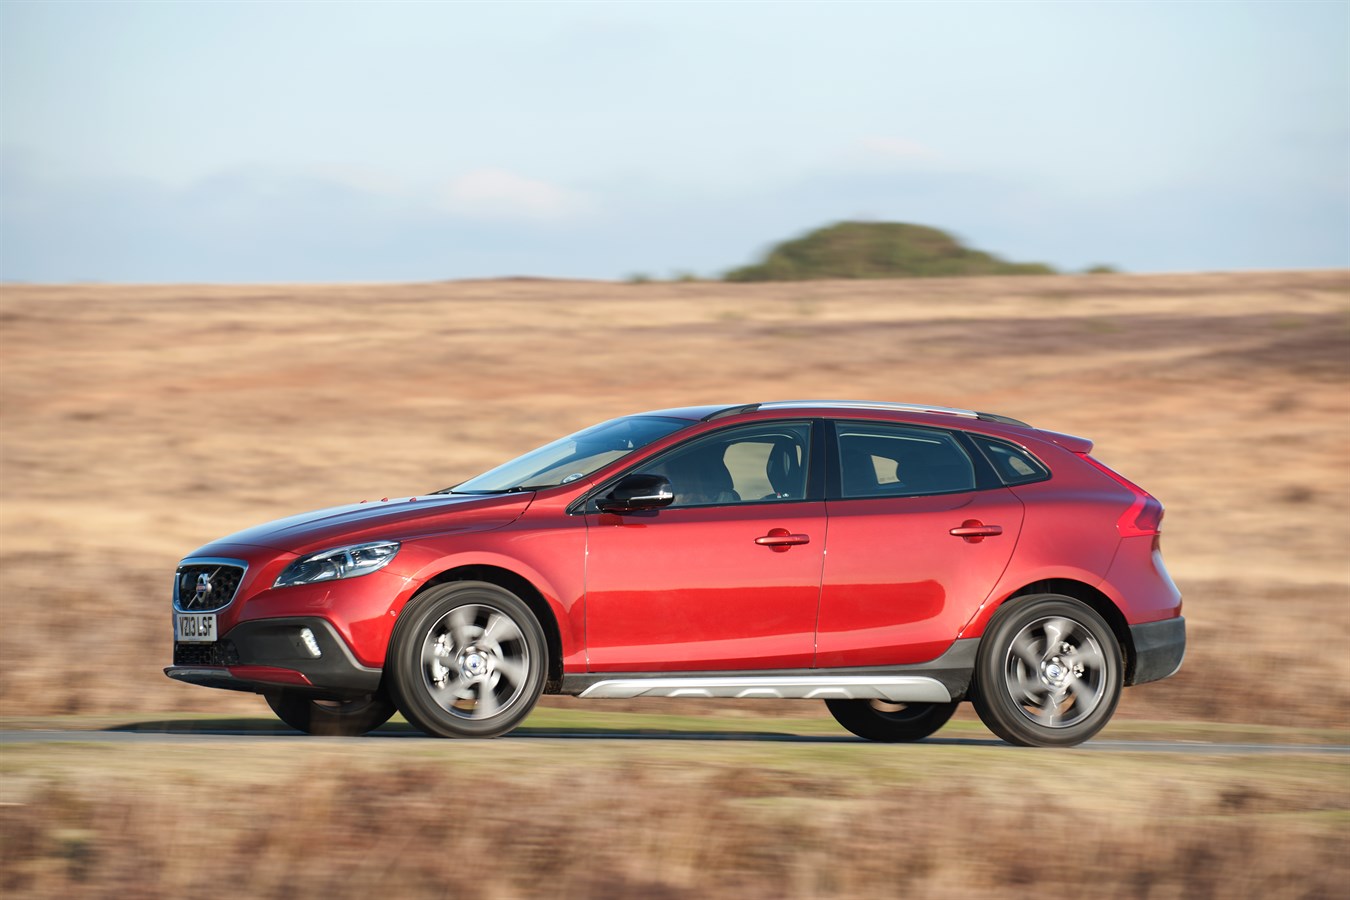 Front, 3/4, dynamic image of the all-new Volvo V40 Cross Country